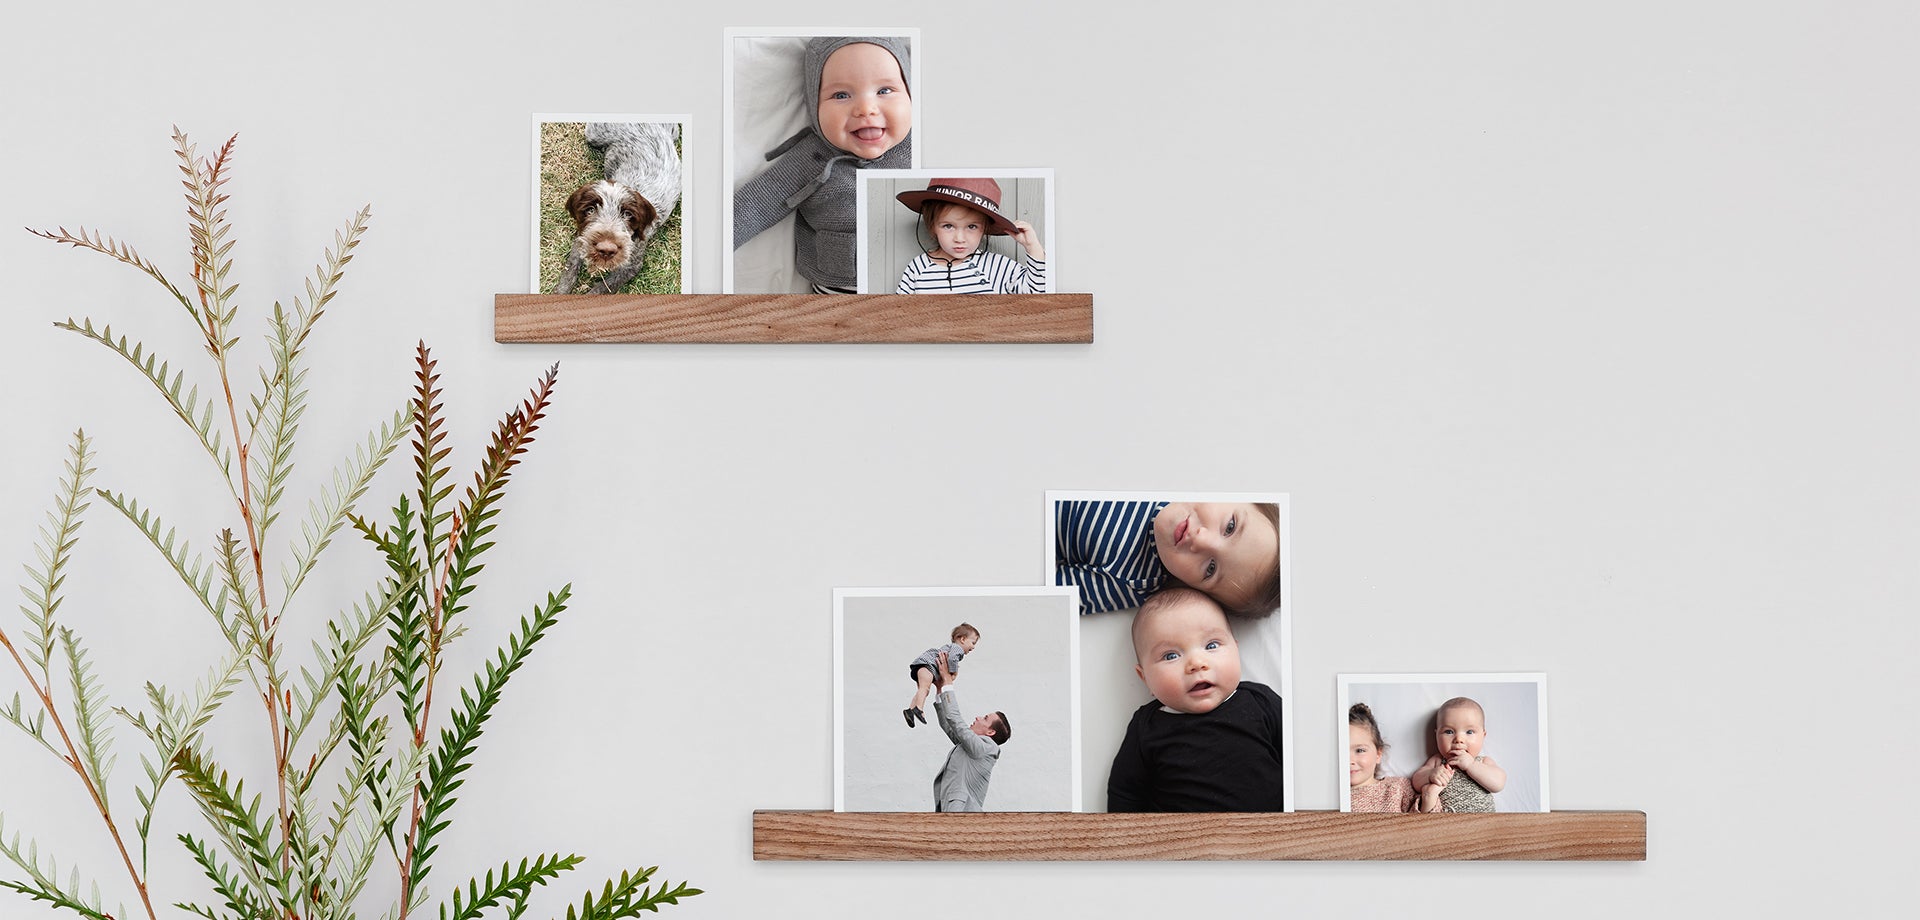 Photo prints on wooden ledges are one of many nursery wall decor ideas